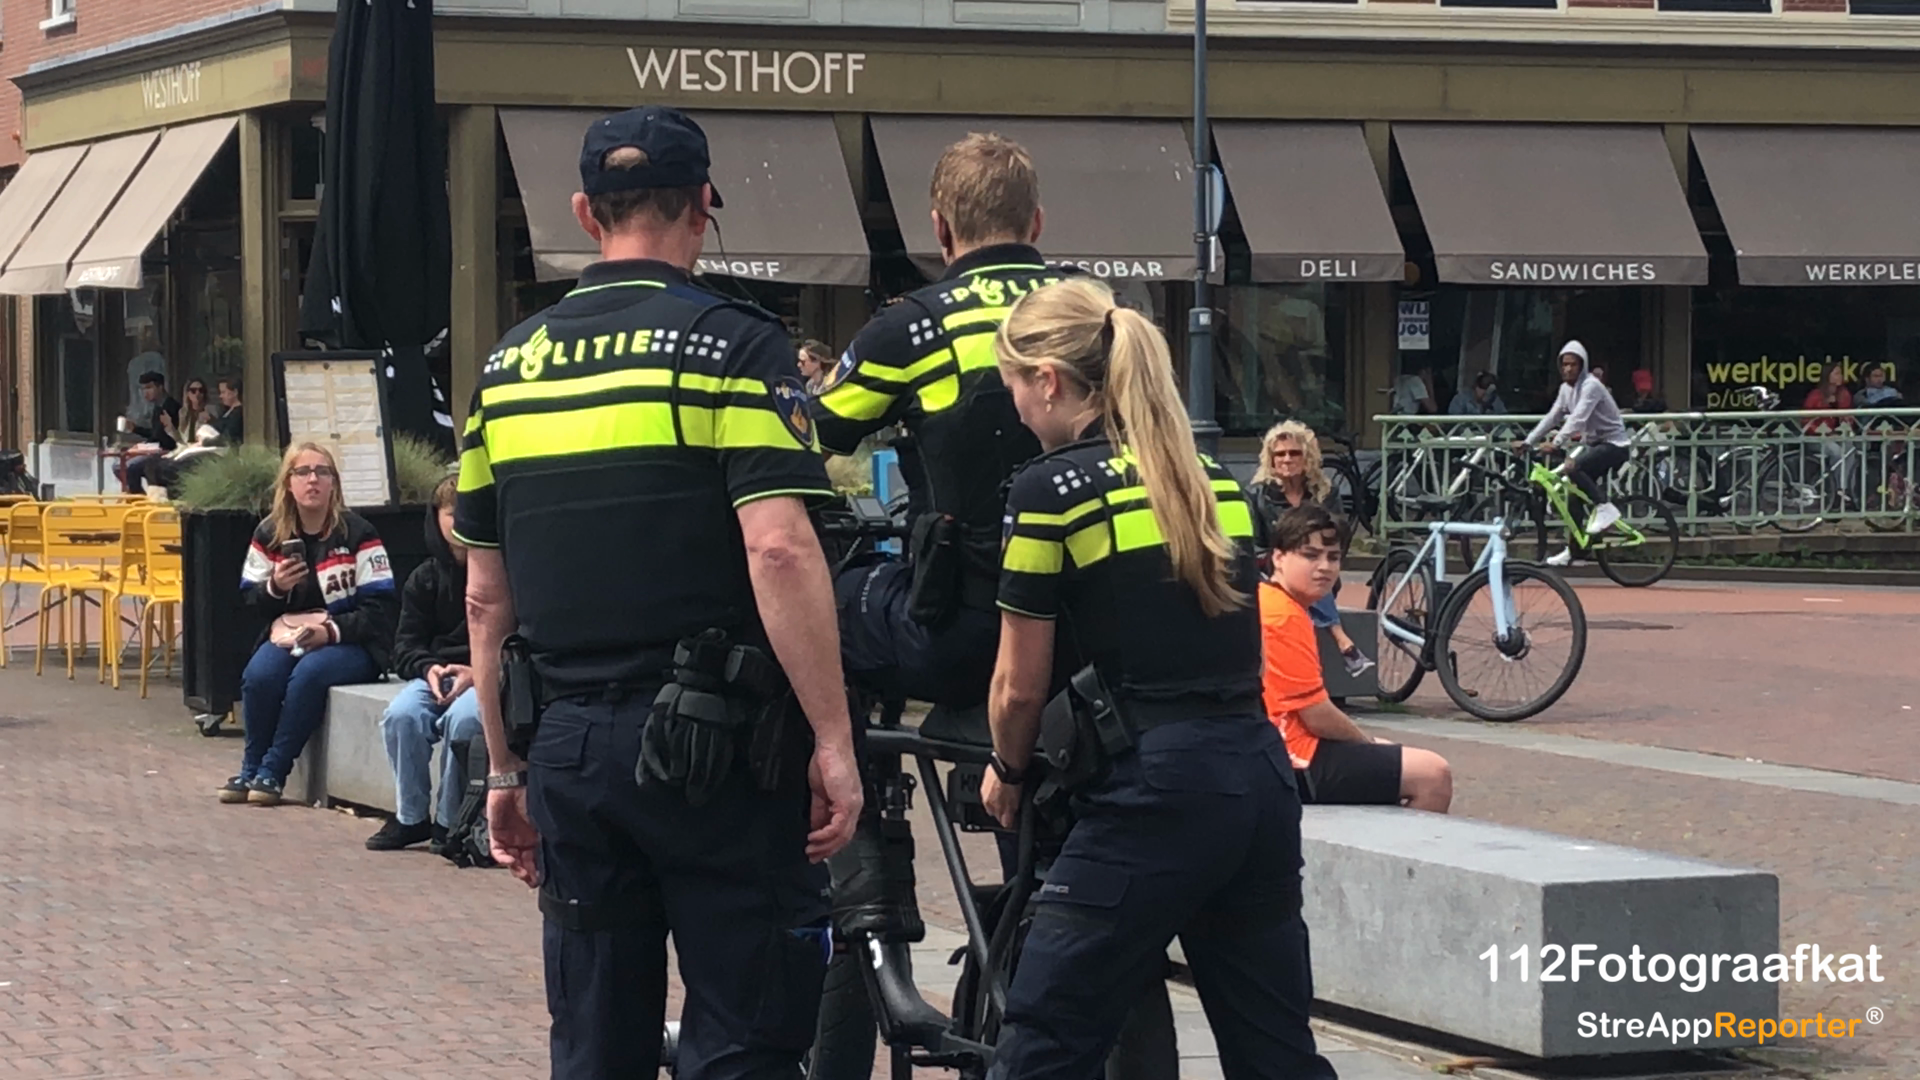  Strengere controle op fatbikes in Haarlem